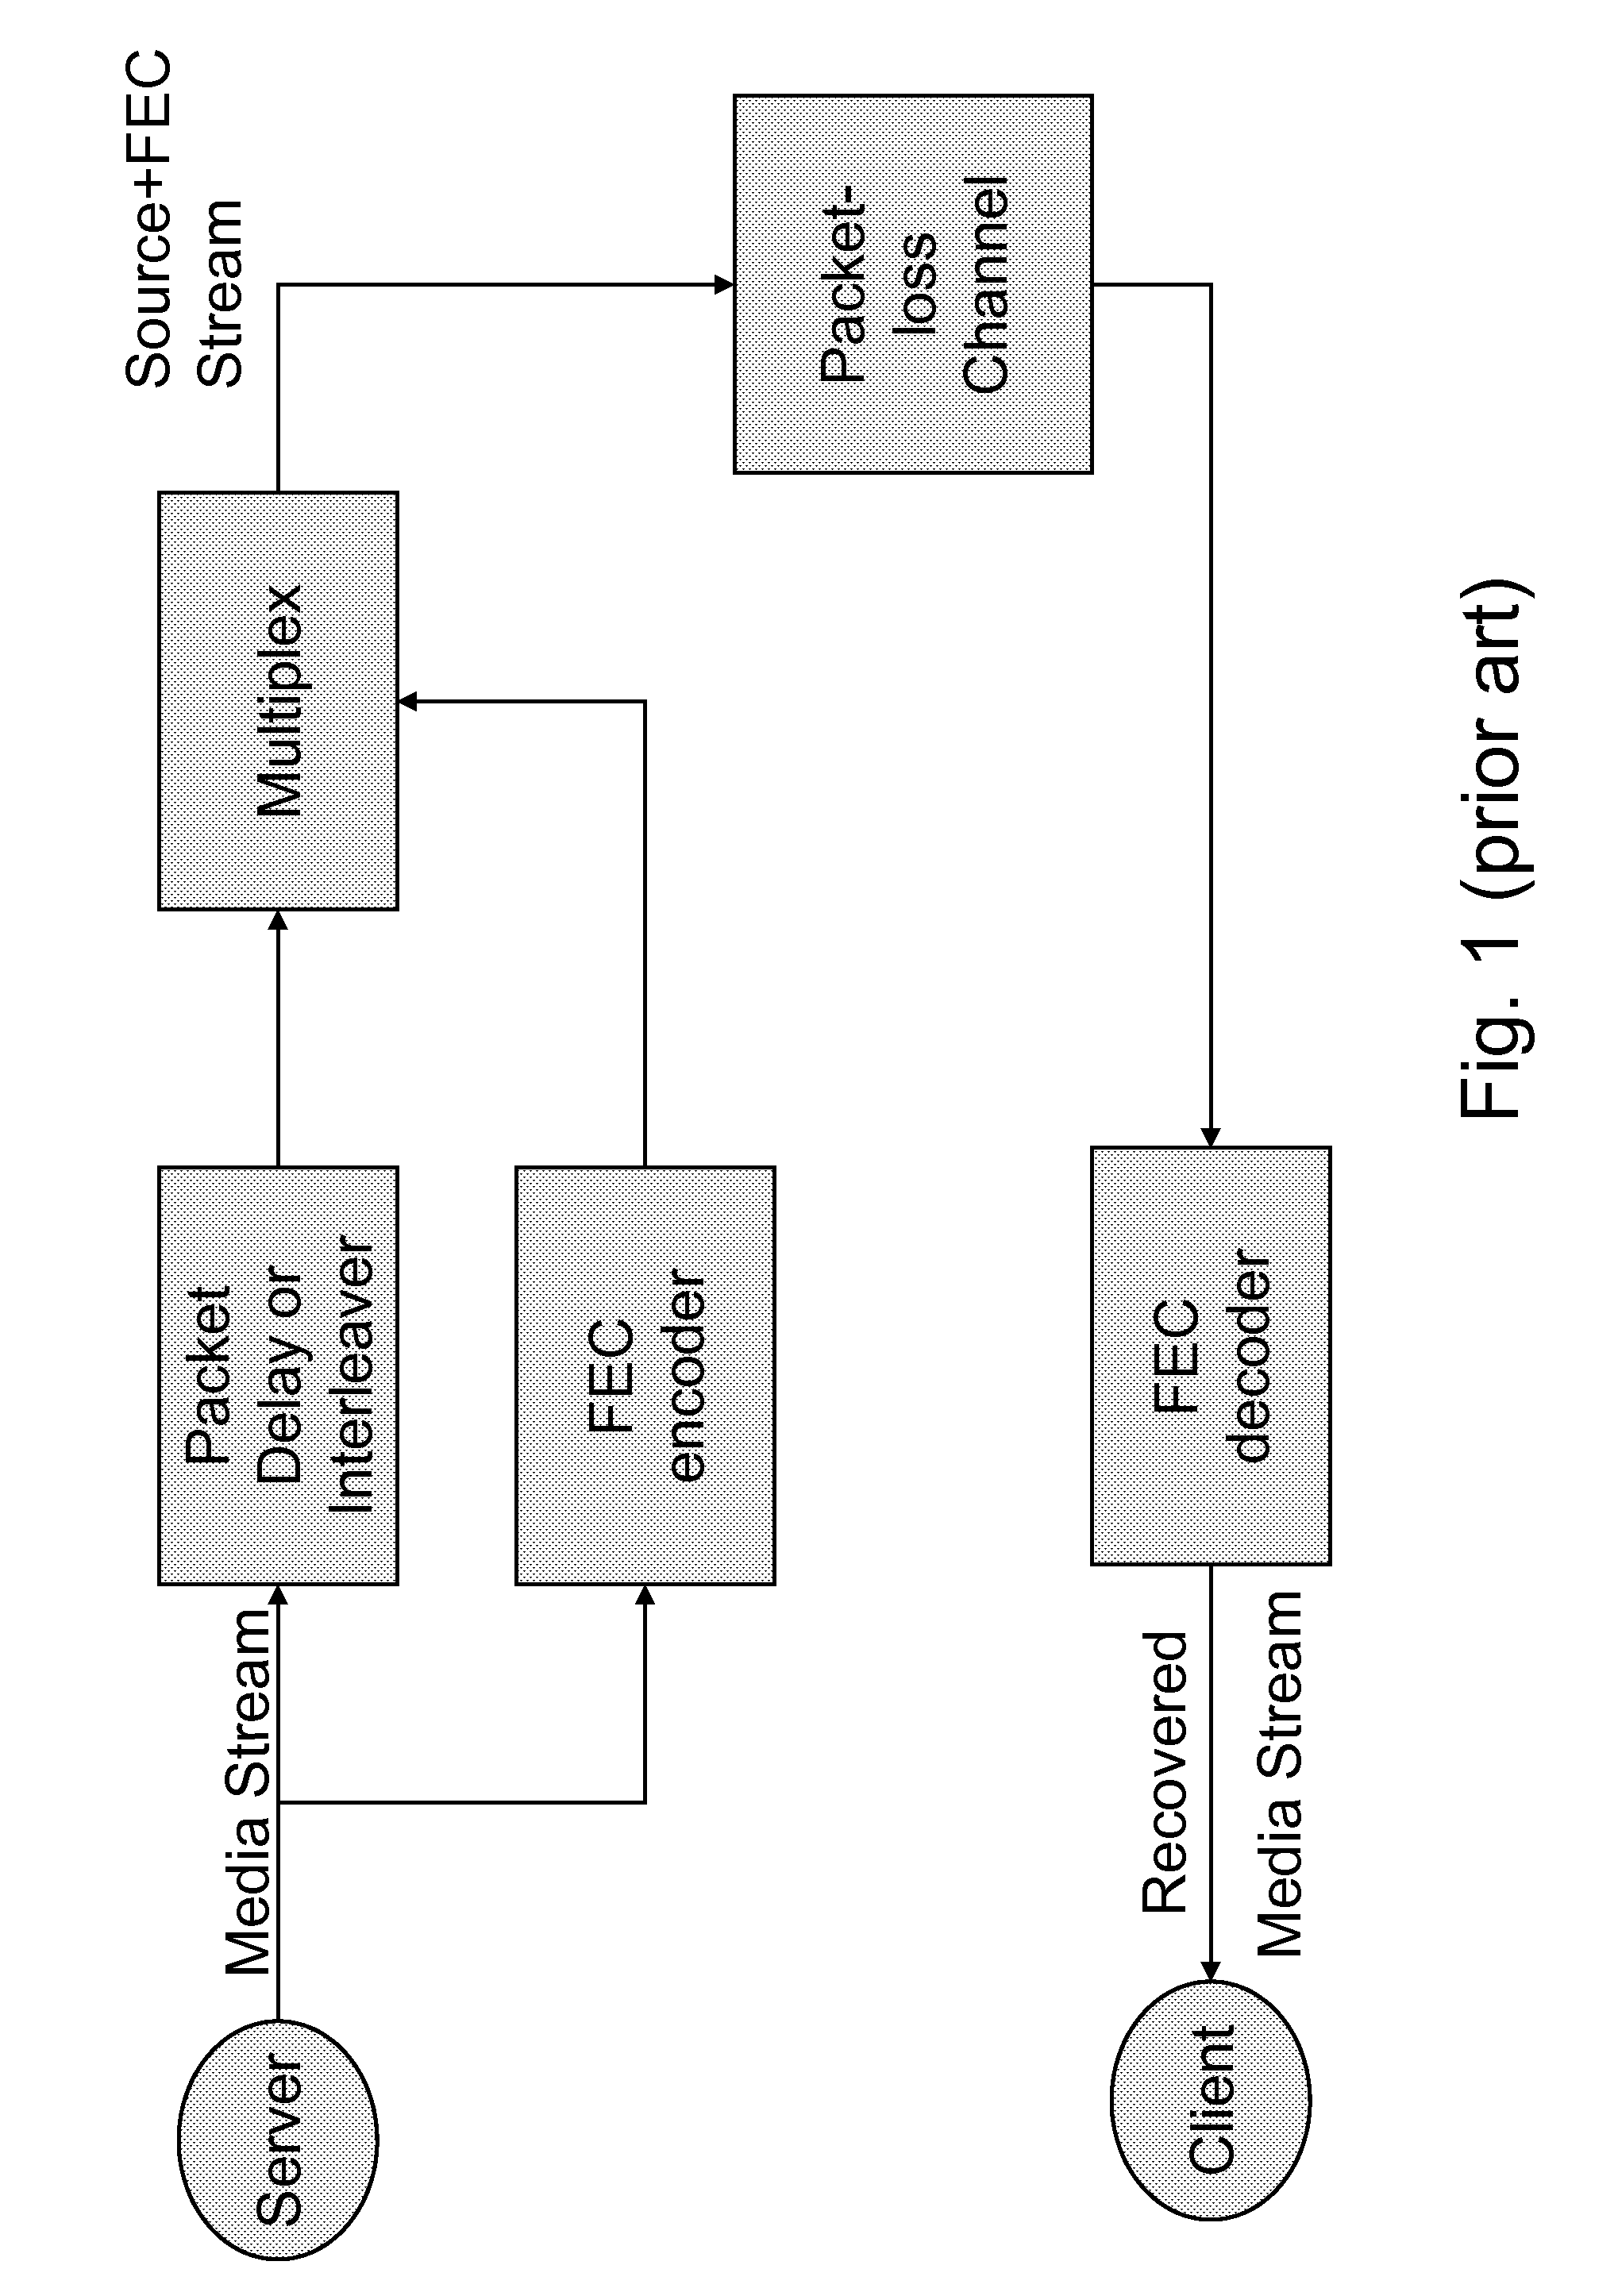 Hypothetical fec decoder and signalling for decoding control